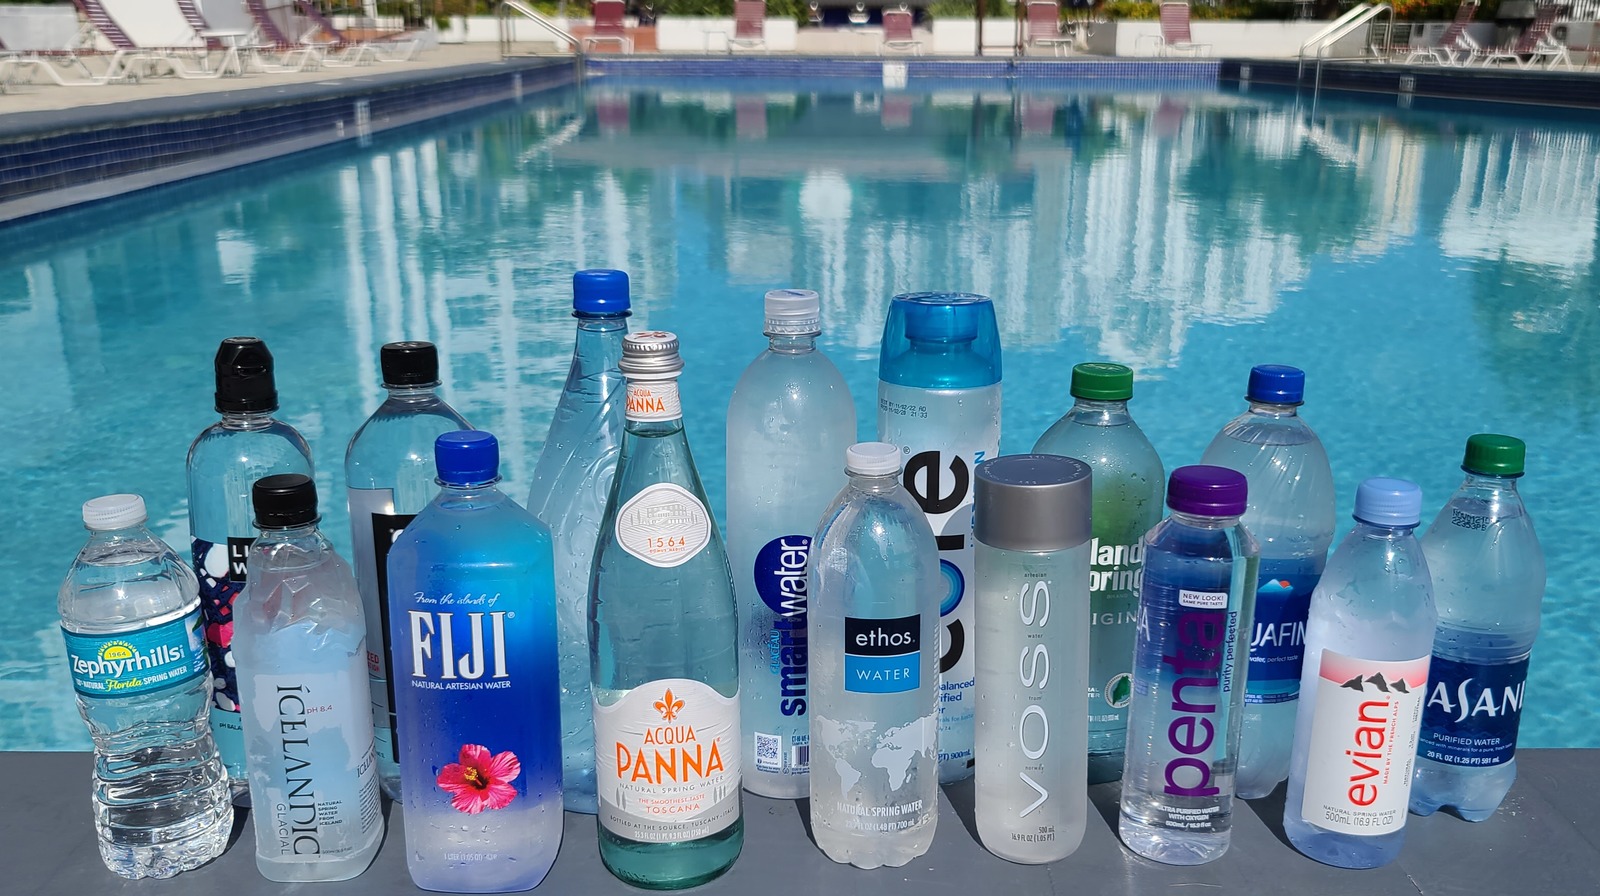 https://www.mashed.com/img/gallery/bottled-water-brands-ranked-worst-to-best/l-intro-1608139453.jpg